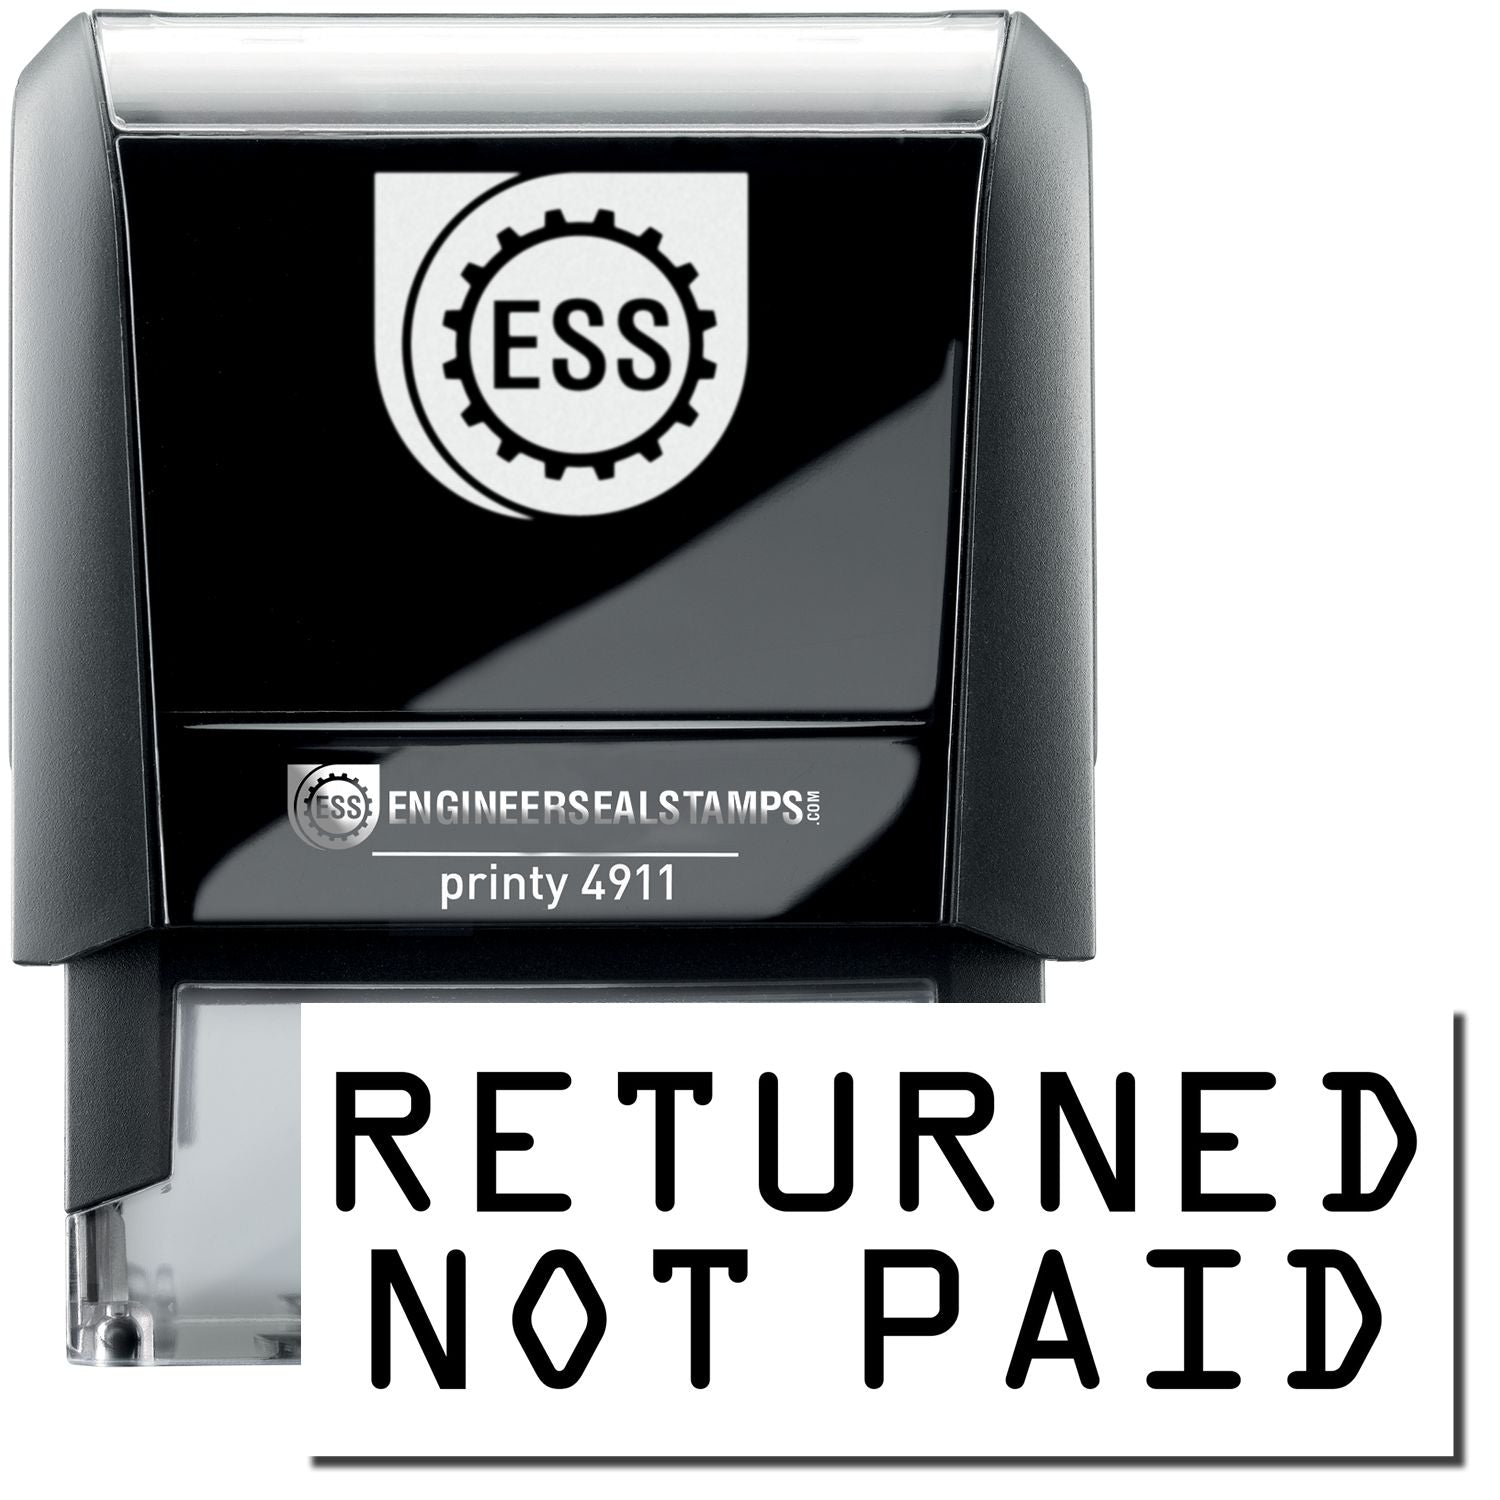 A self-inking stamp with a stamped image showing how the text "RETURNED NOT PAID" is displayed after stamping.